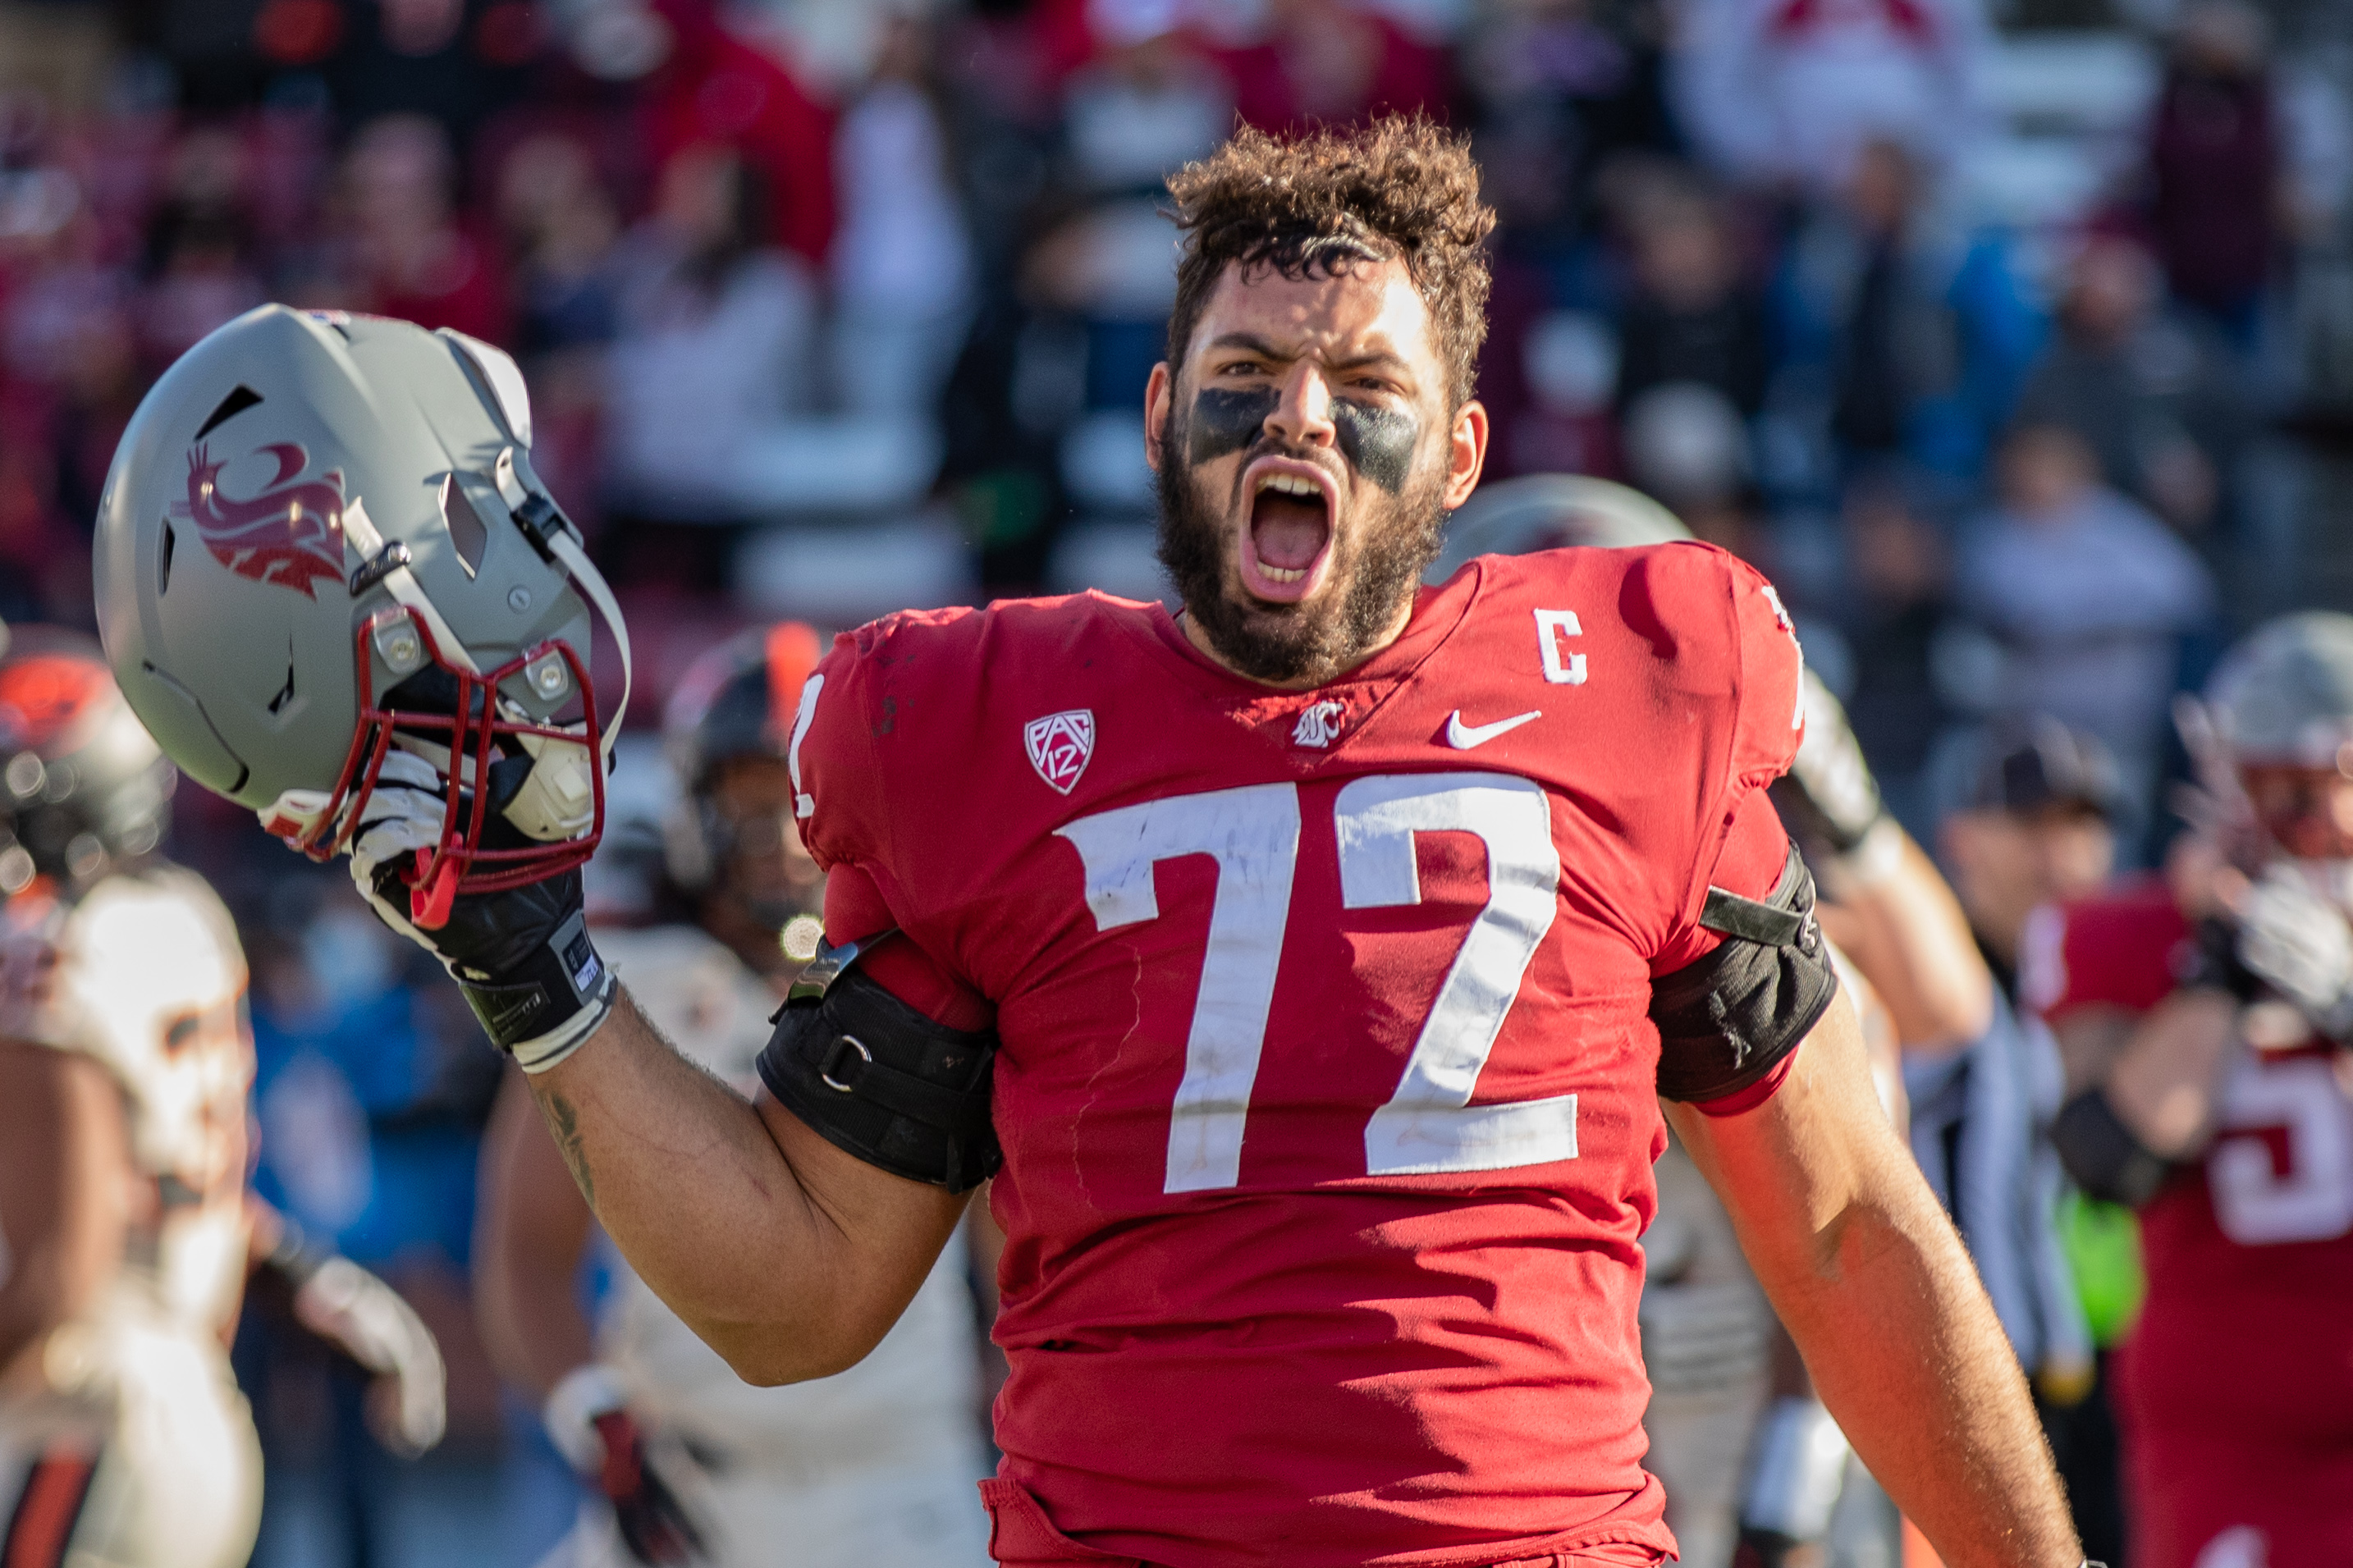 PULLMAN, WA - OCTOBER 9: Washington State offensive lineman Abe Lucas (72) yells after the game ends in a PAC 12 conference matchup between the Oregon State Beavers and the Washington State Cougars on October 9, 2021, at Martin Stadium in Pullman, WA.